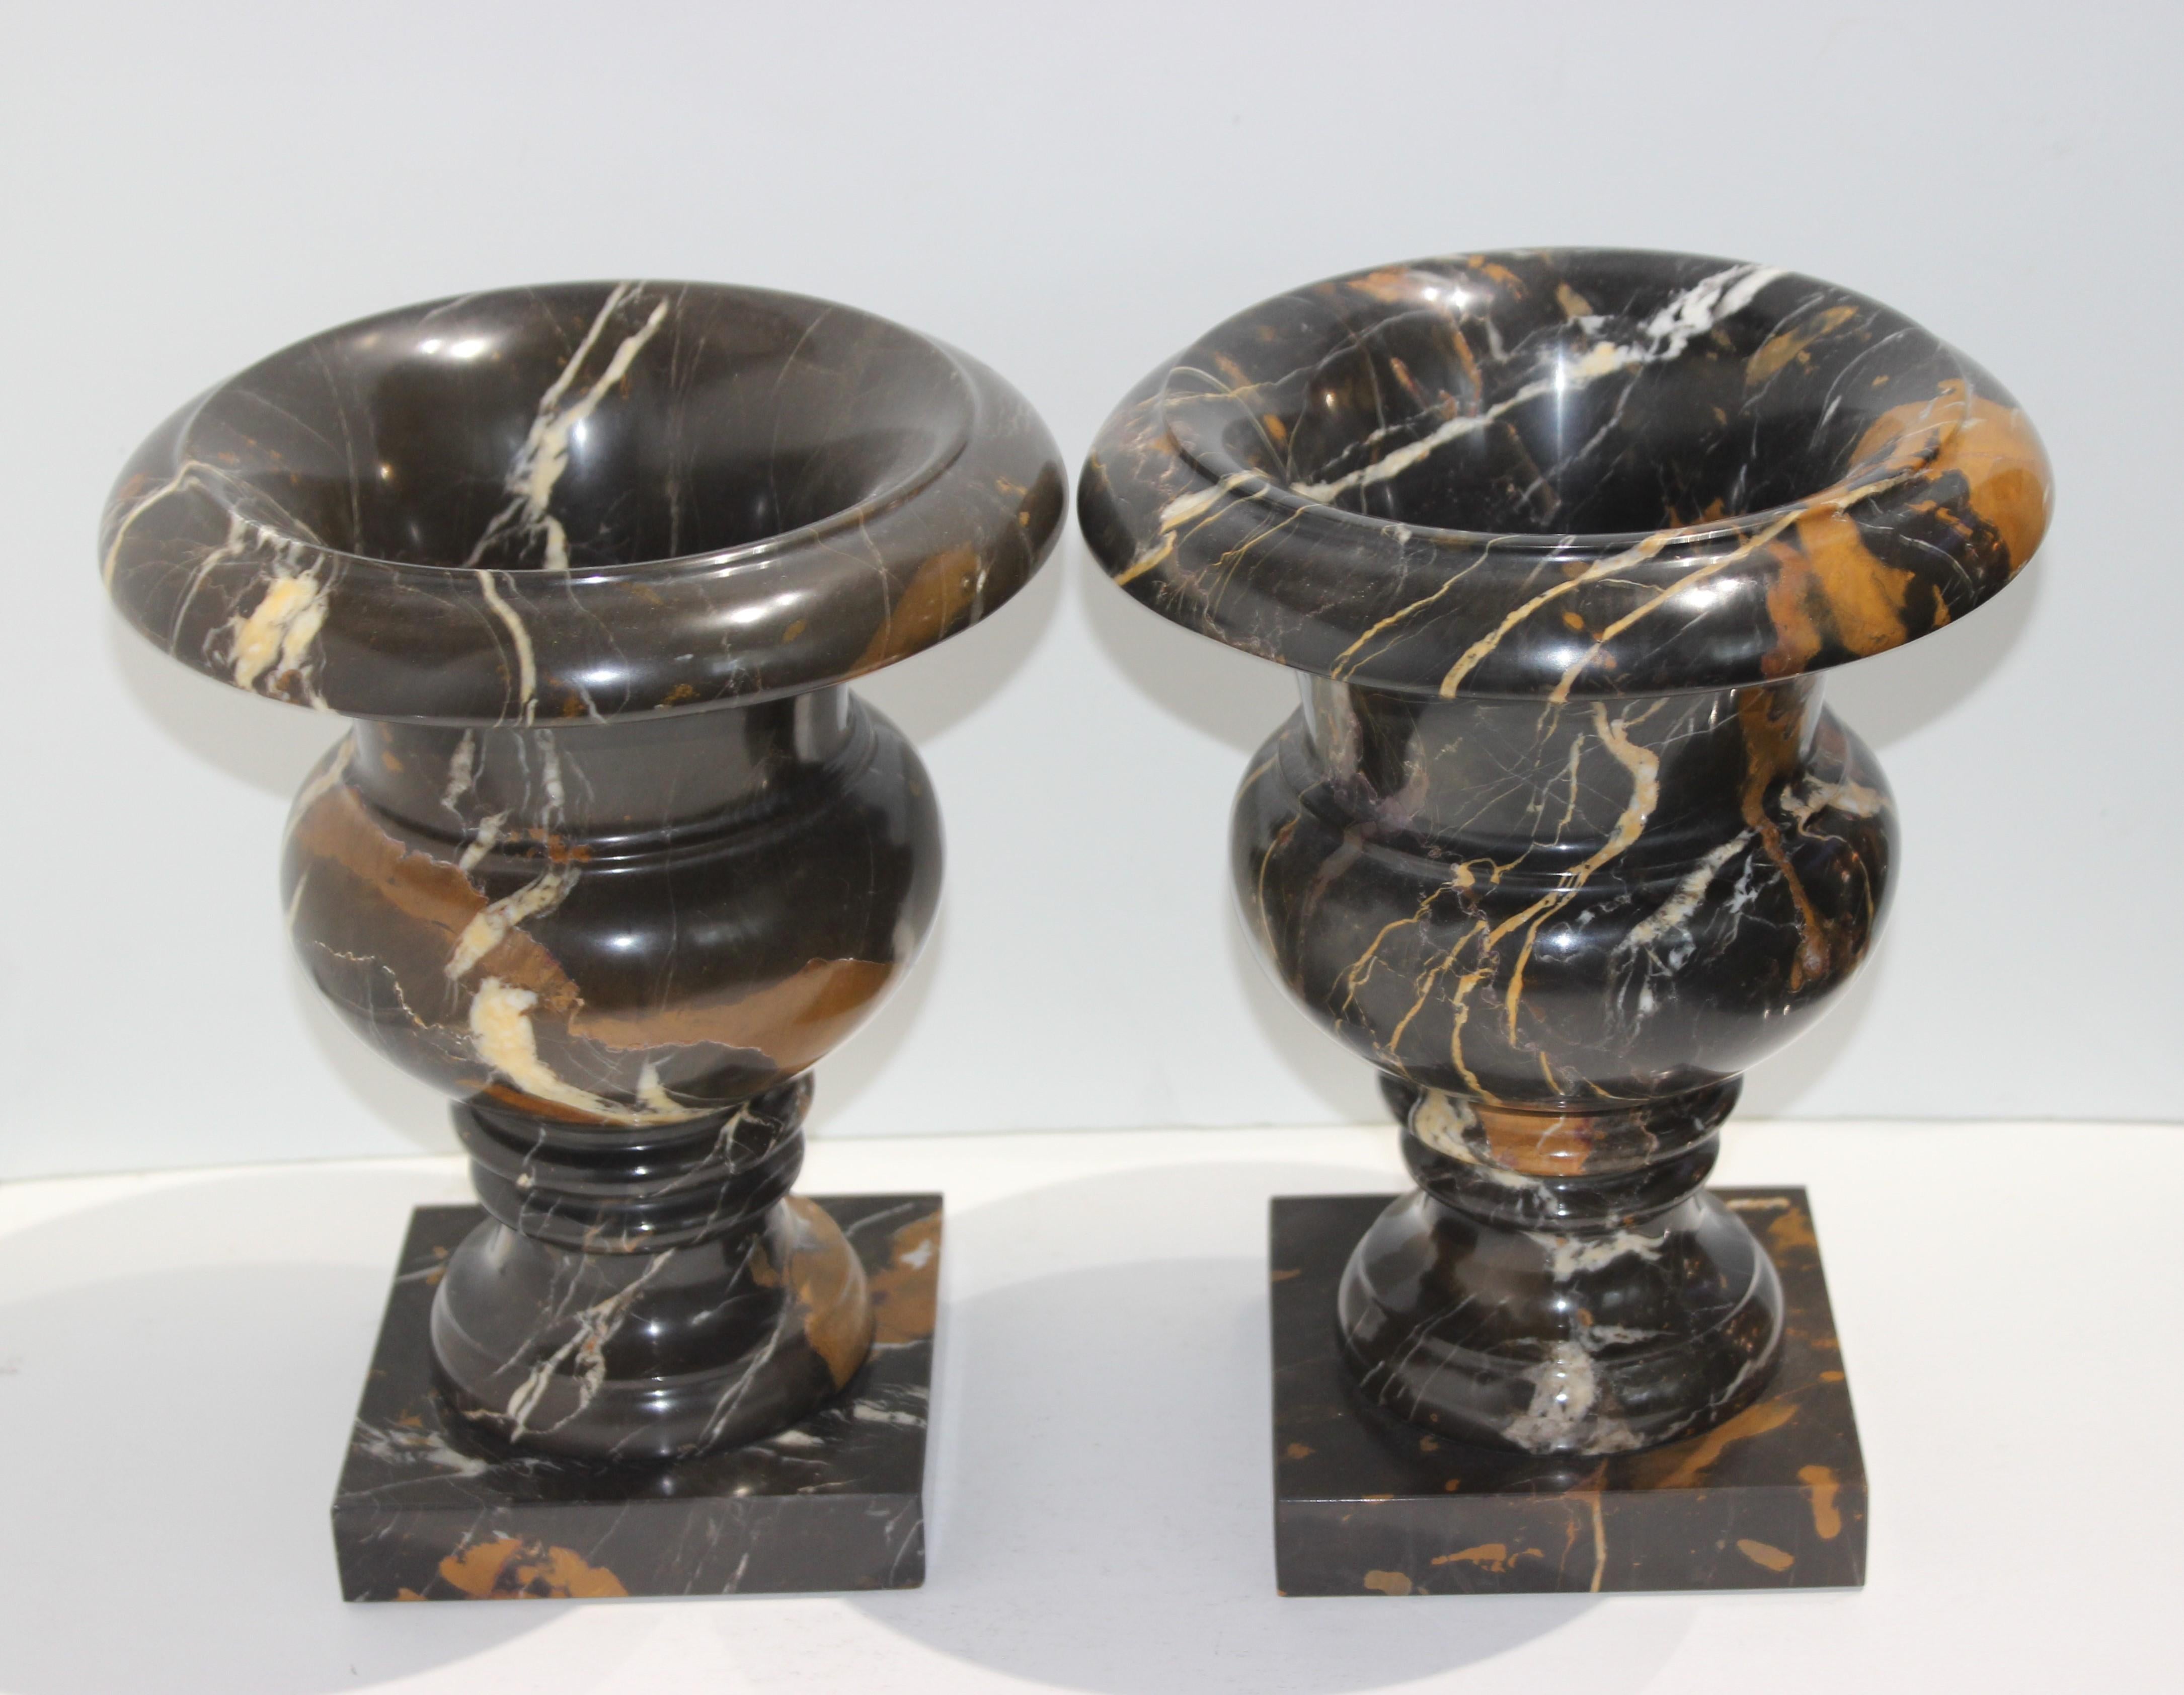 Neoclassical Revival Pair of Black Variegated Marble Campana Form Urns